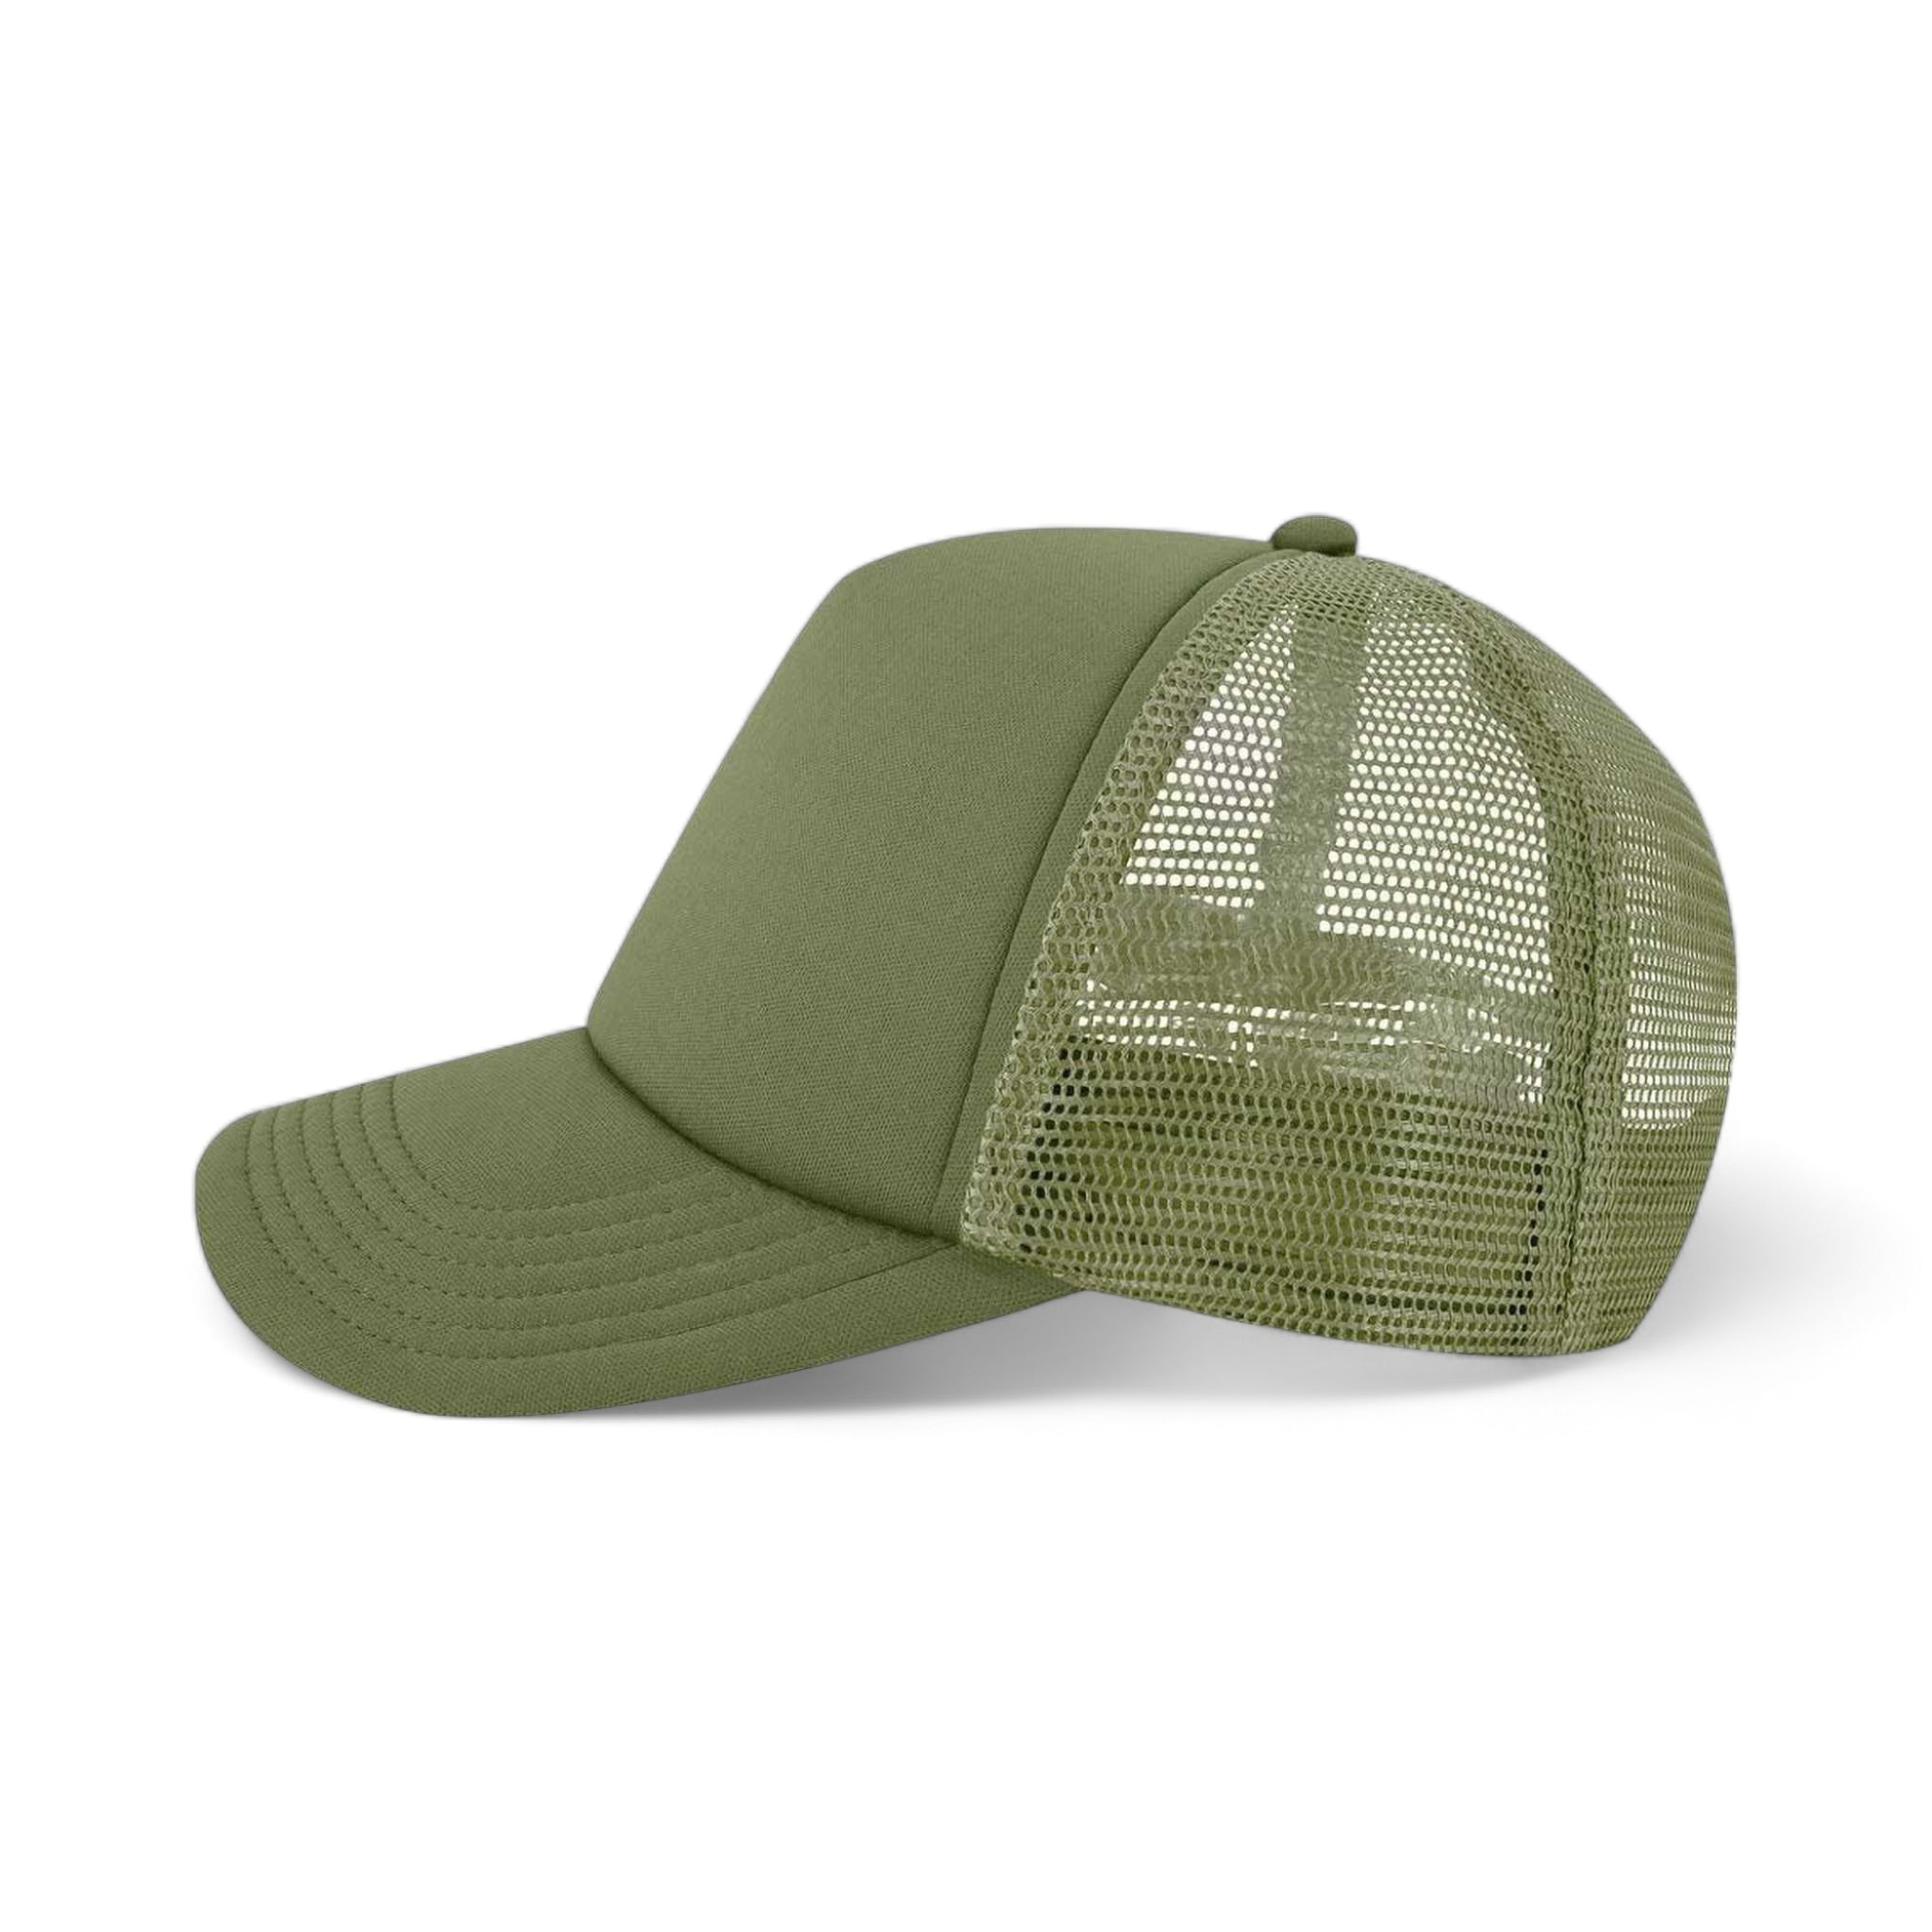 Side view of LEGACY LTA custom hat in light olive green